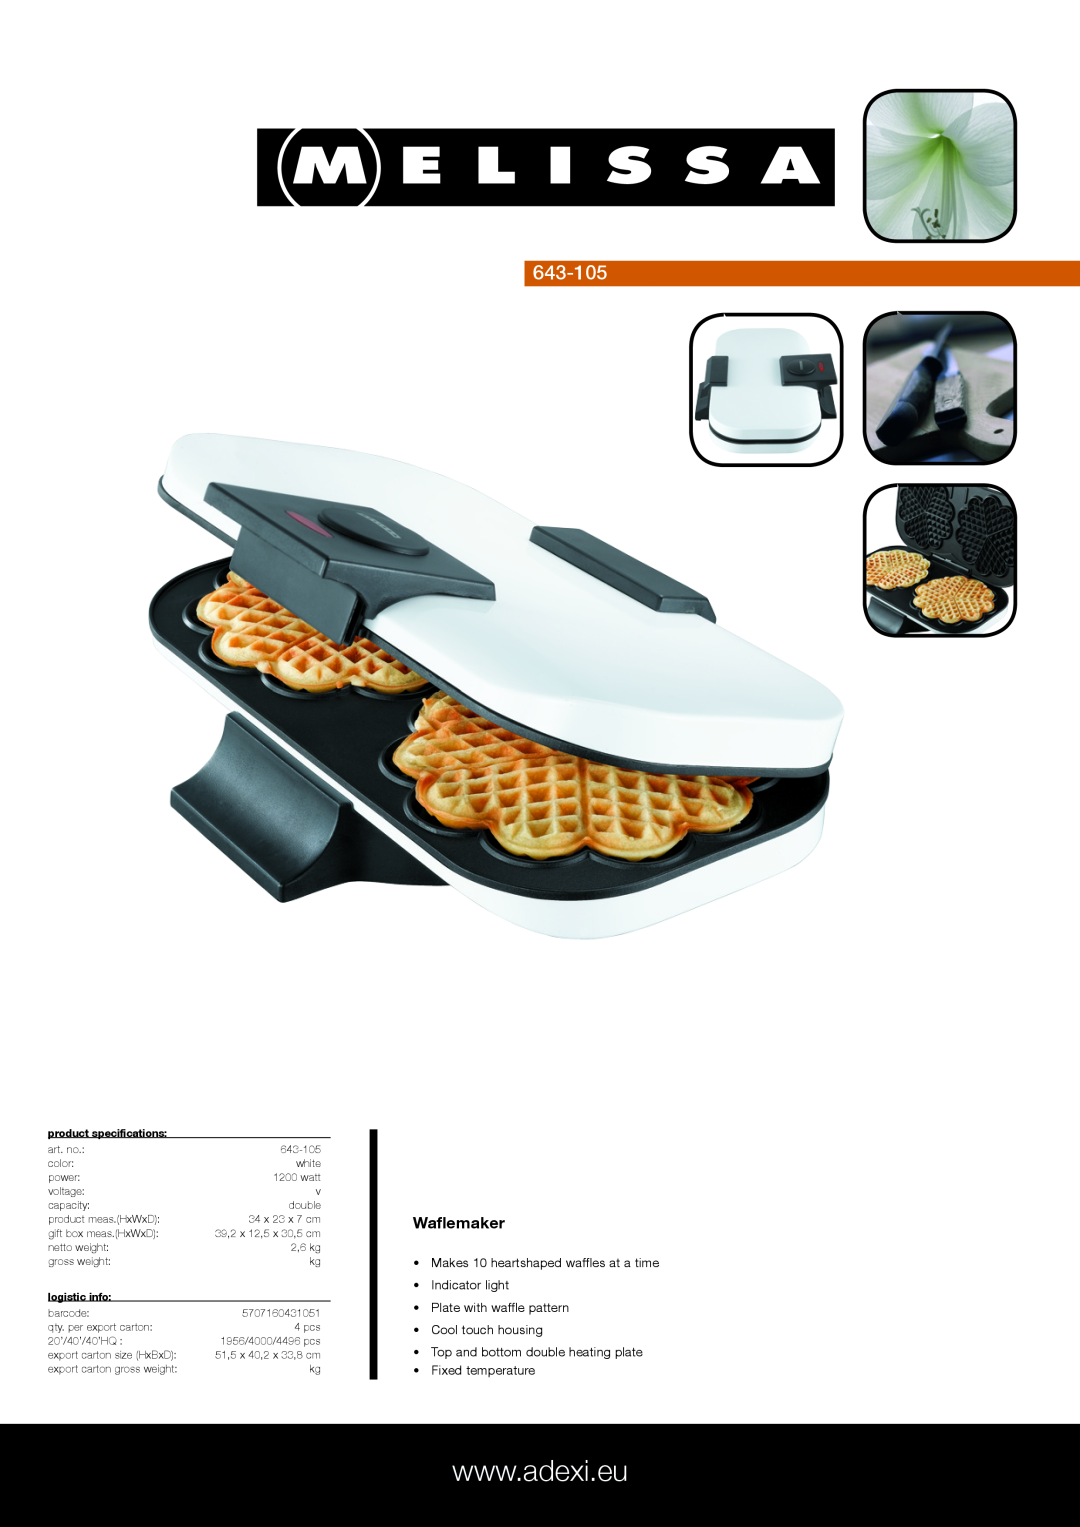 Melissa 643-105 specifications Waflemaker, Makes 10 heartshaped waffles at a time, Cool touch housing, Fixed temperature 